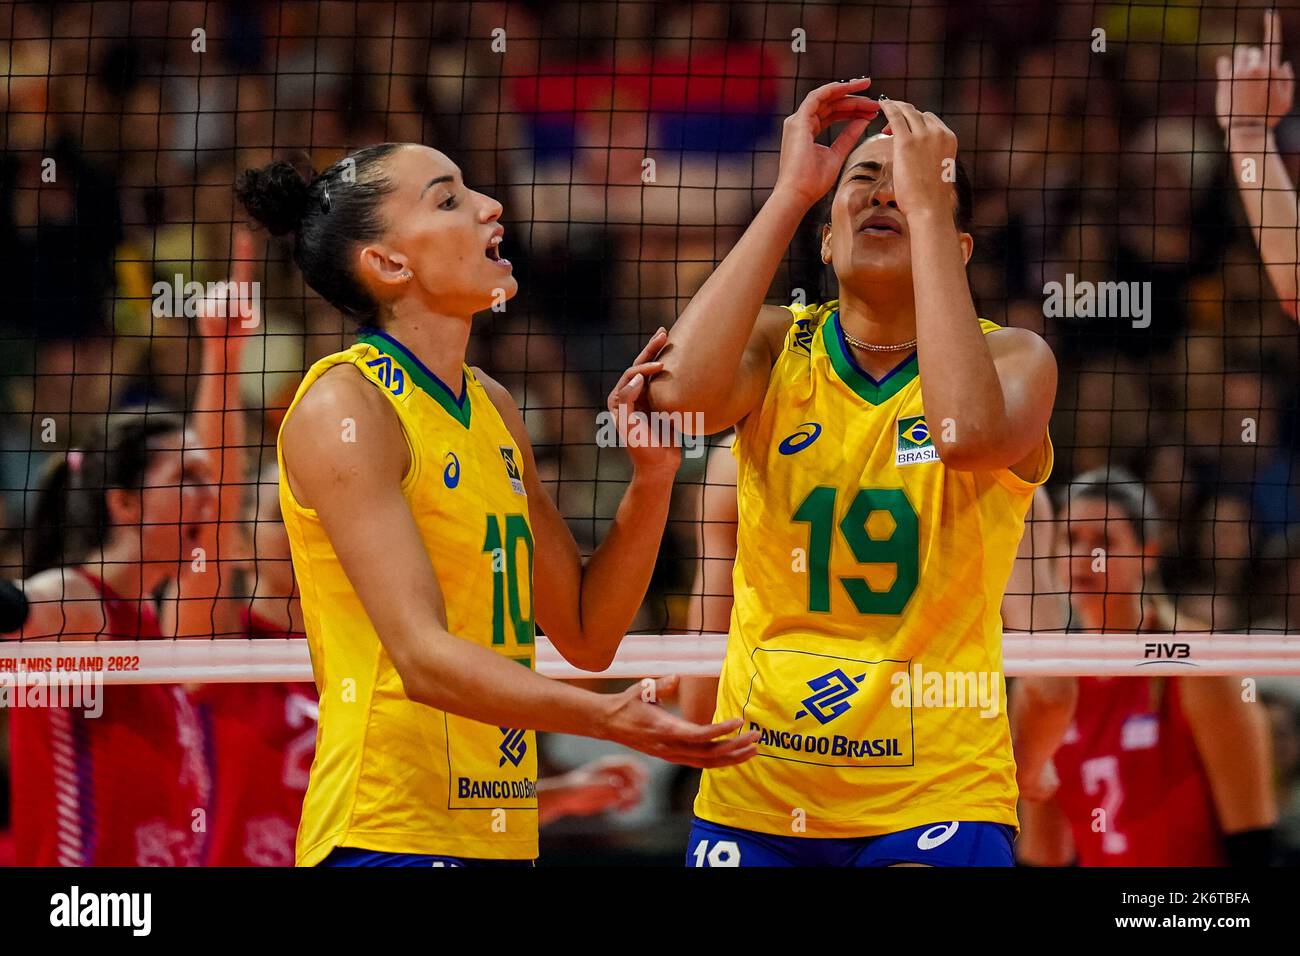 Apeldoorn, Netherlands. 15th Oct, 2022. APELDOORN, NETHERLANDS - OCTOBER 15: Gabriela Gabi Braga Guimaraes of Brazil and Tainara Lemes Santos of Brazil react during the Final match between Brazil and Serbia on Day 20 of the FIVB Volleyball Womens World Championship 2022 at the Omnisport Apeldoorn on October 15, 2022 in Apeldoorn, Netherlands (Photo by Rene Nijhuis/Orange Pictures) Credit: Orange Pics BV/Alamy Live News Stock Photo